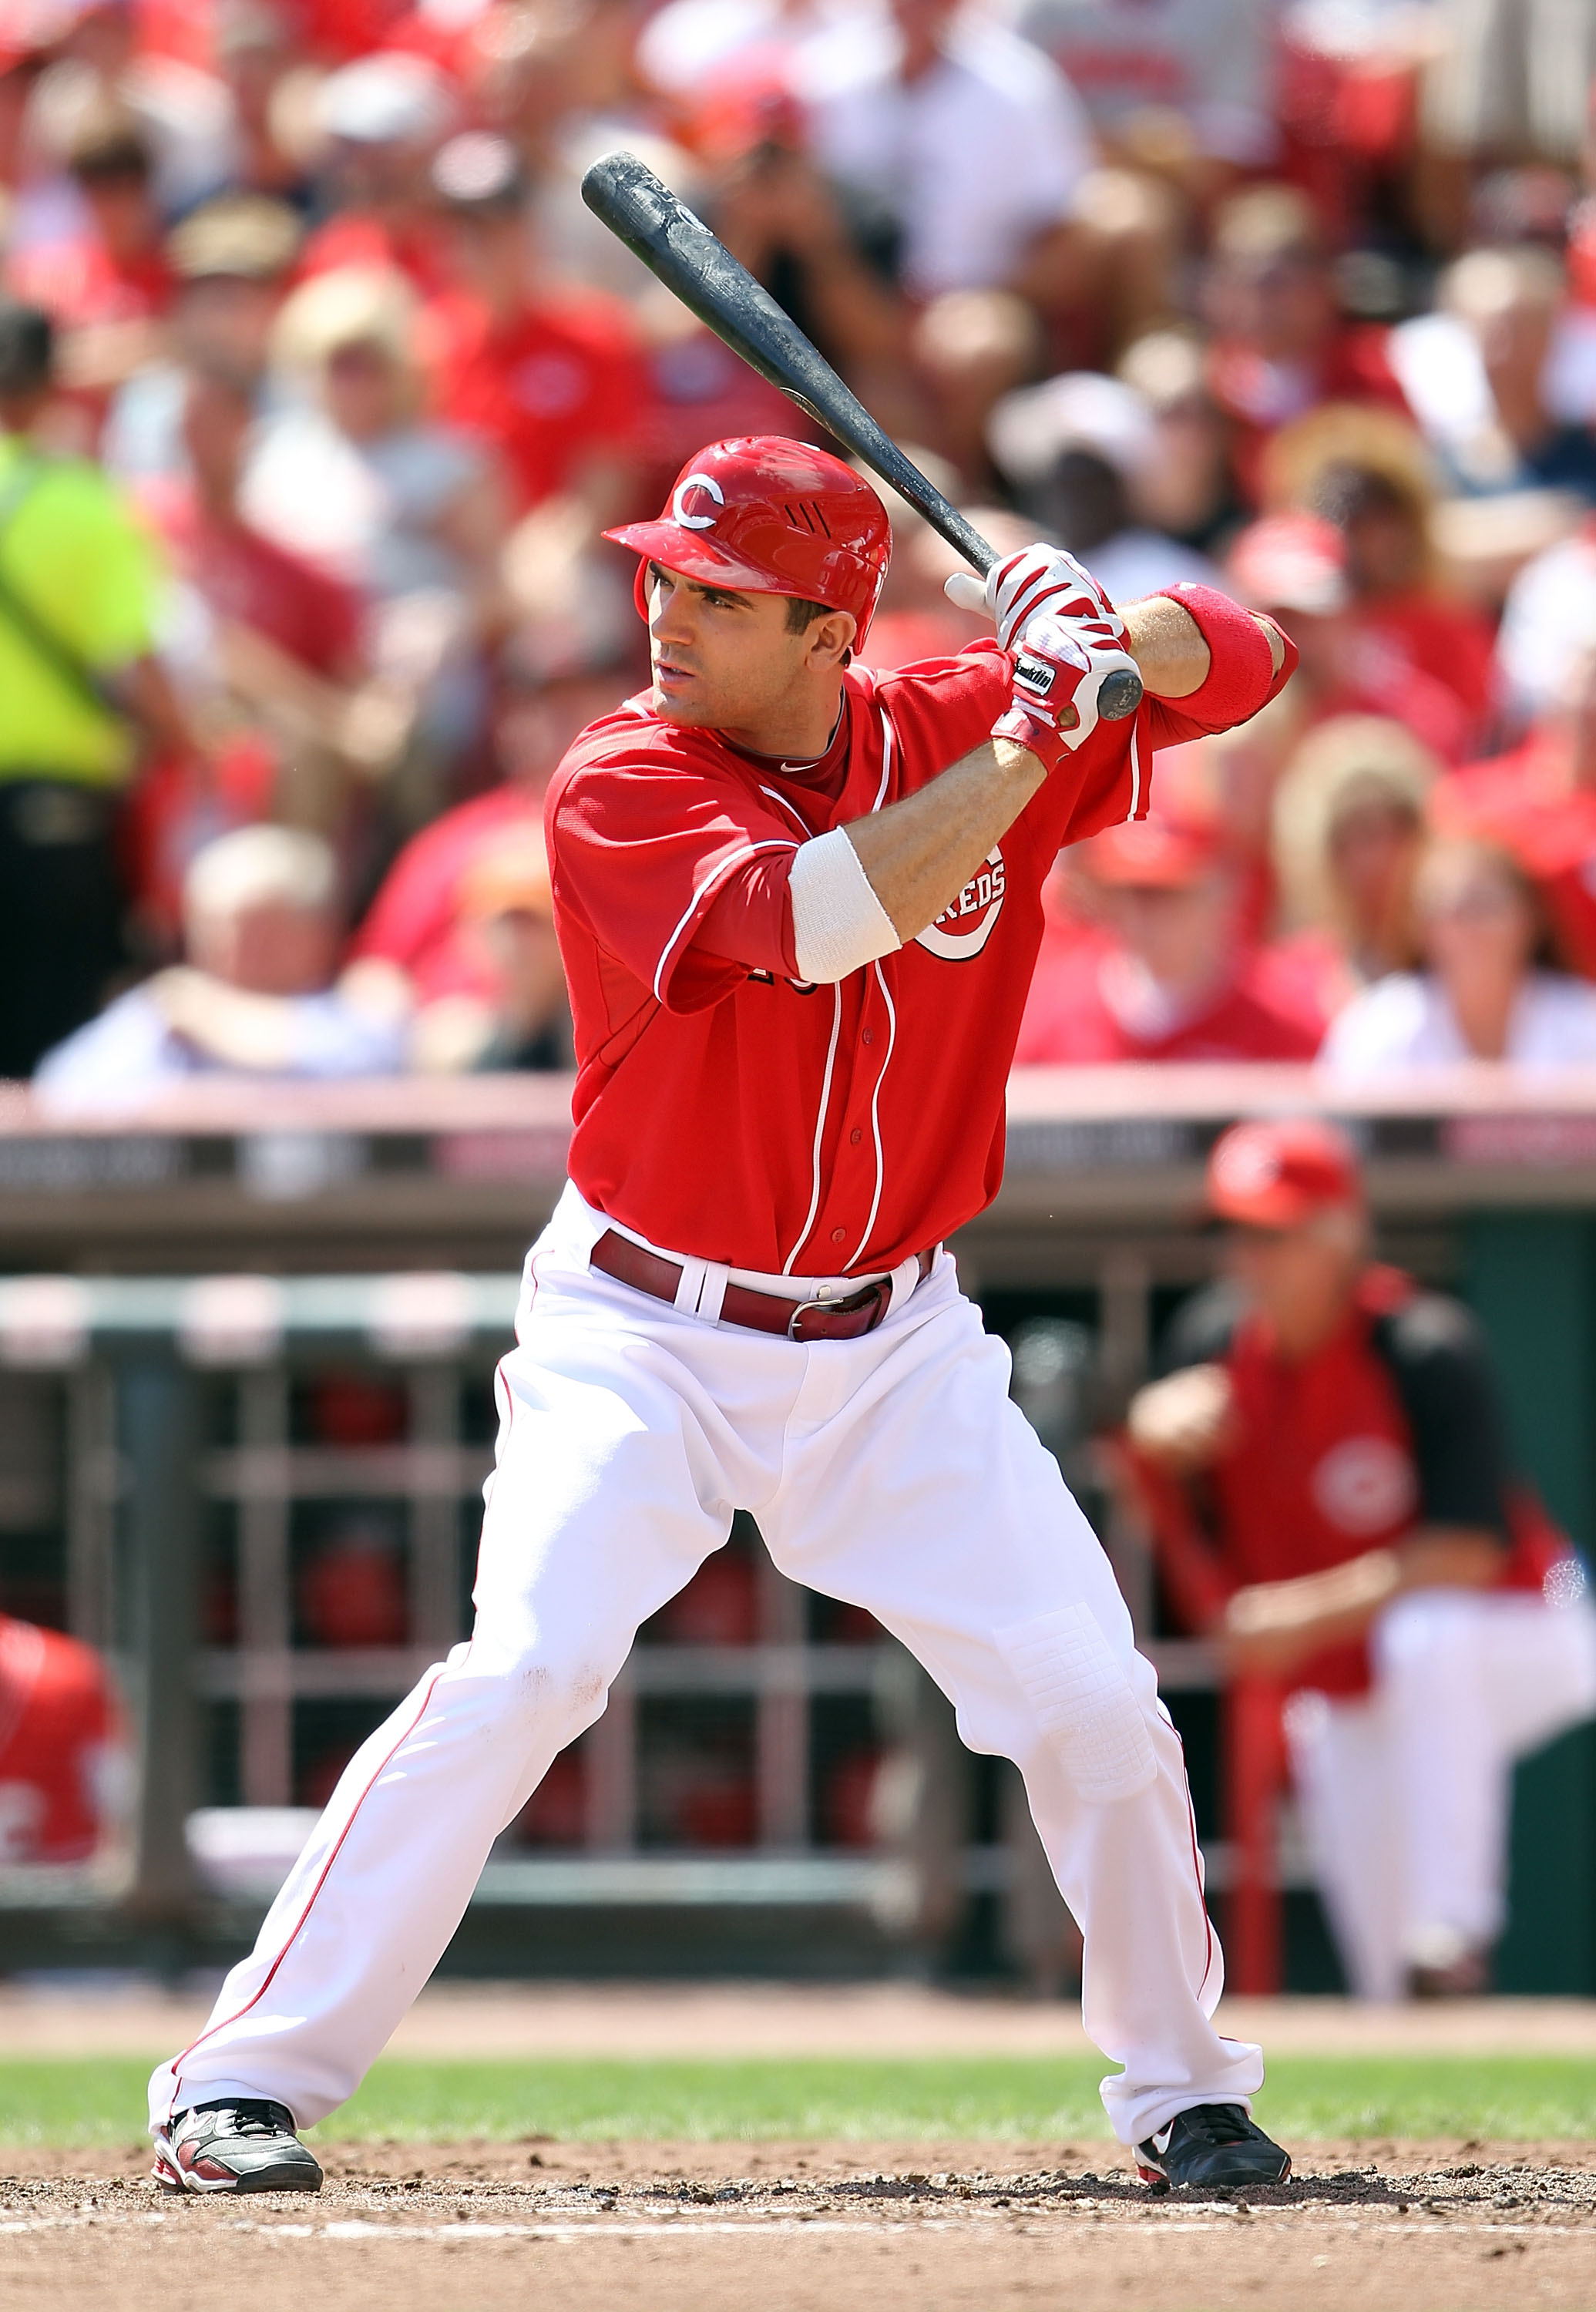 2010 Nl Mvp Joey Votto 10 Reasons Why He Could Win Another One News